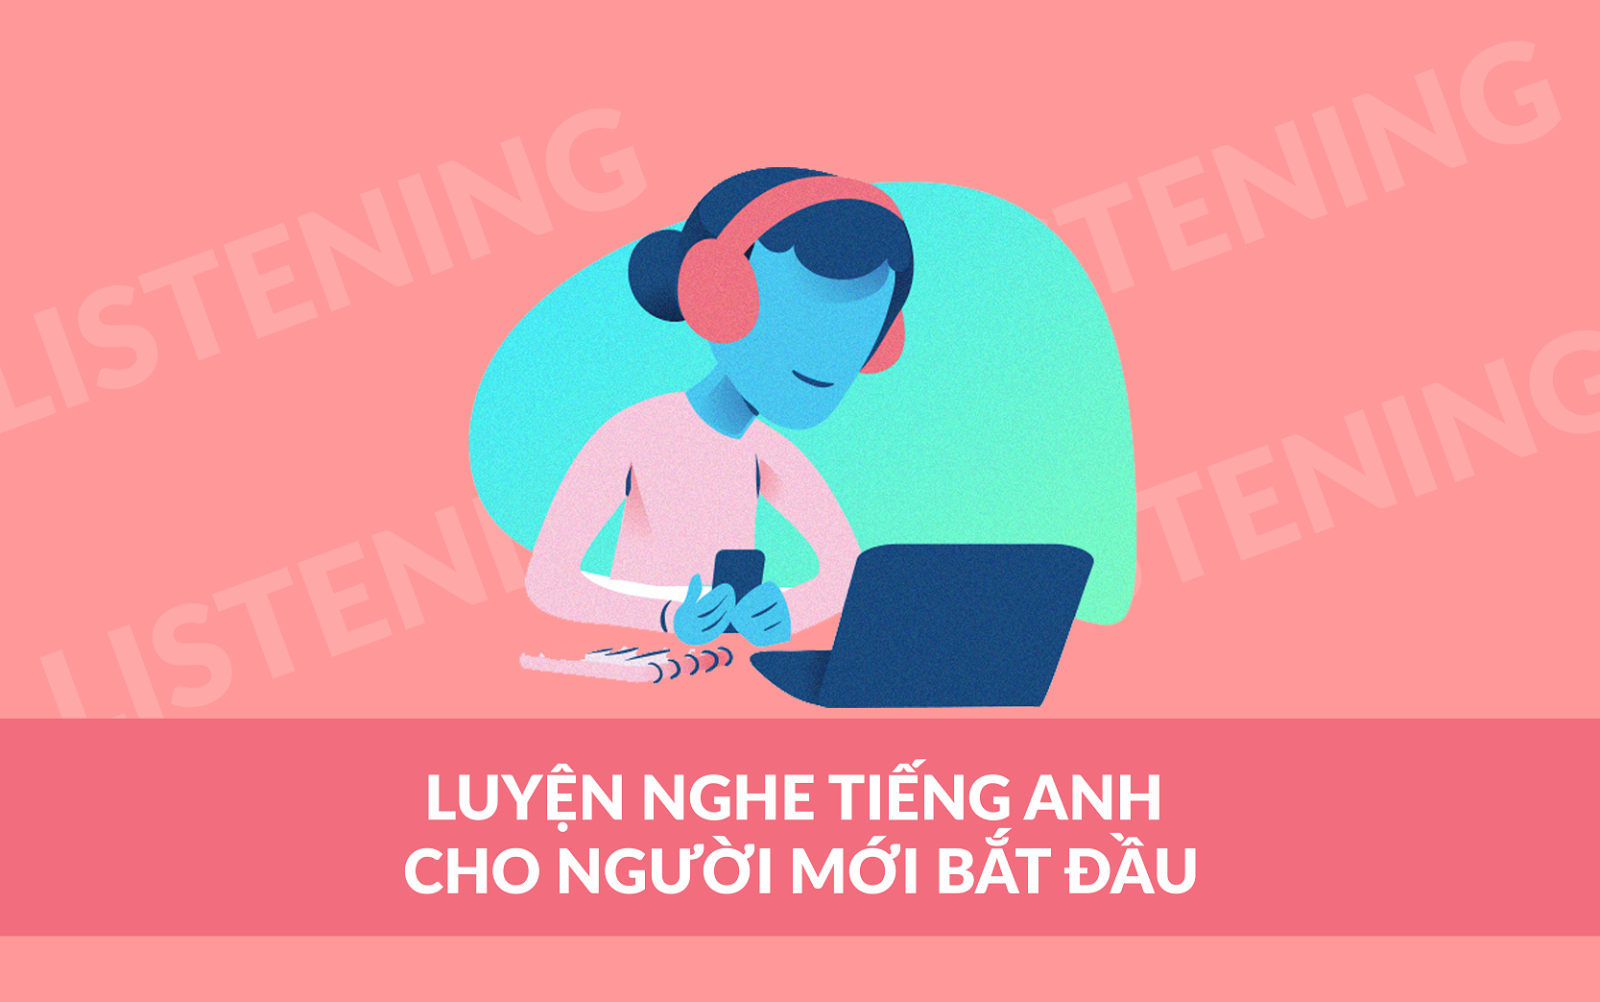 luyen-nghe-tieng-anh-thu-dong.png